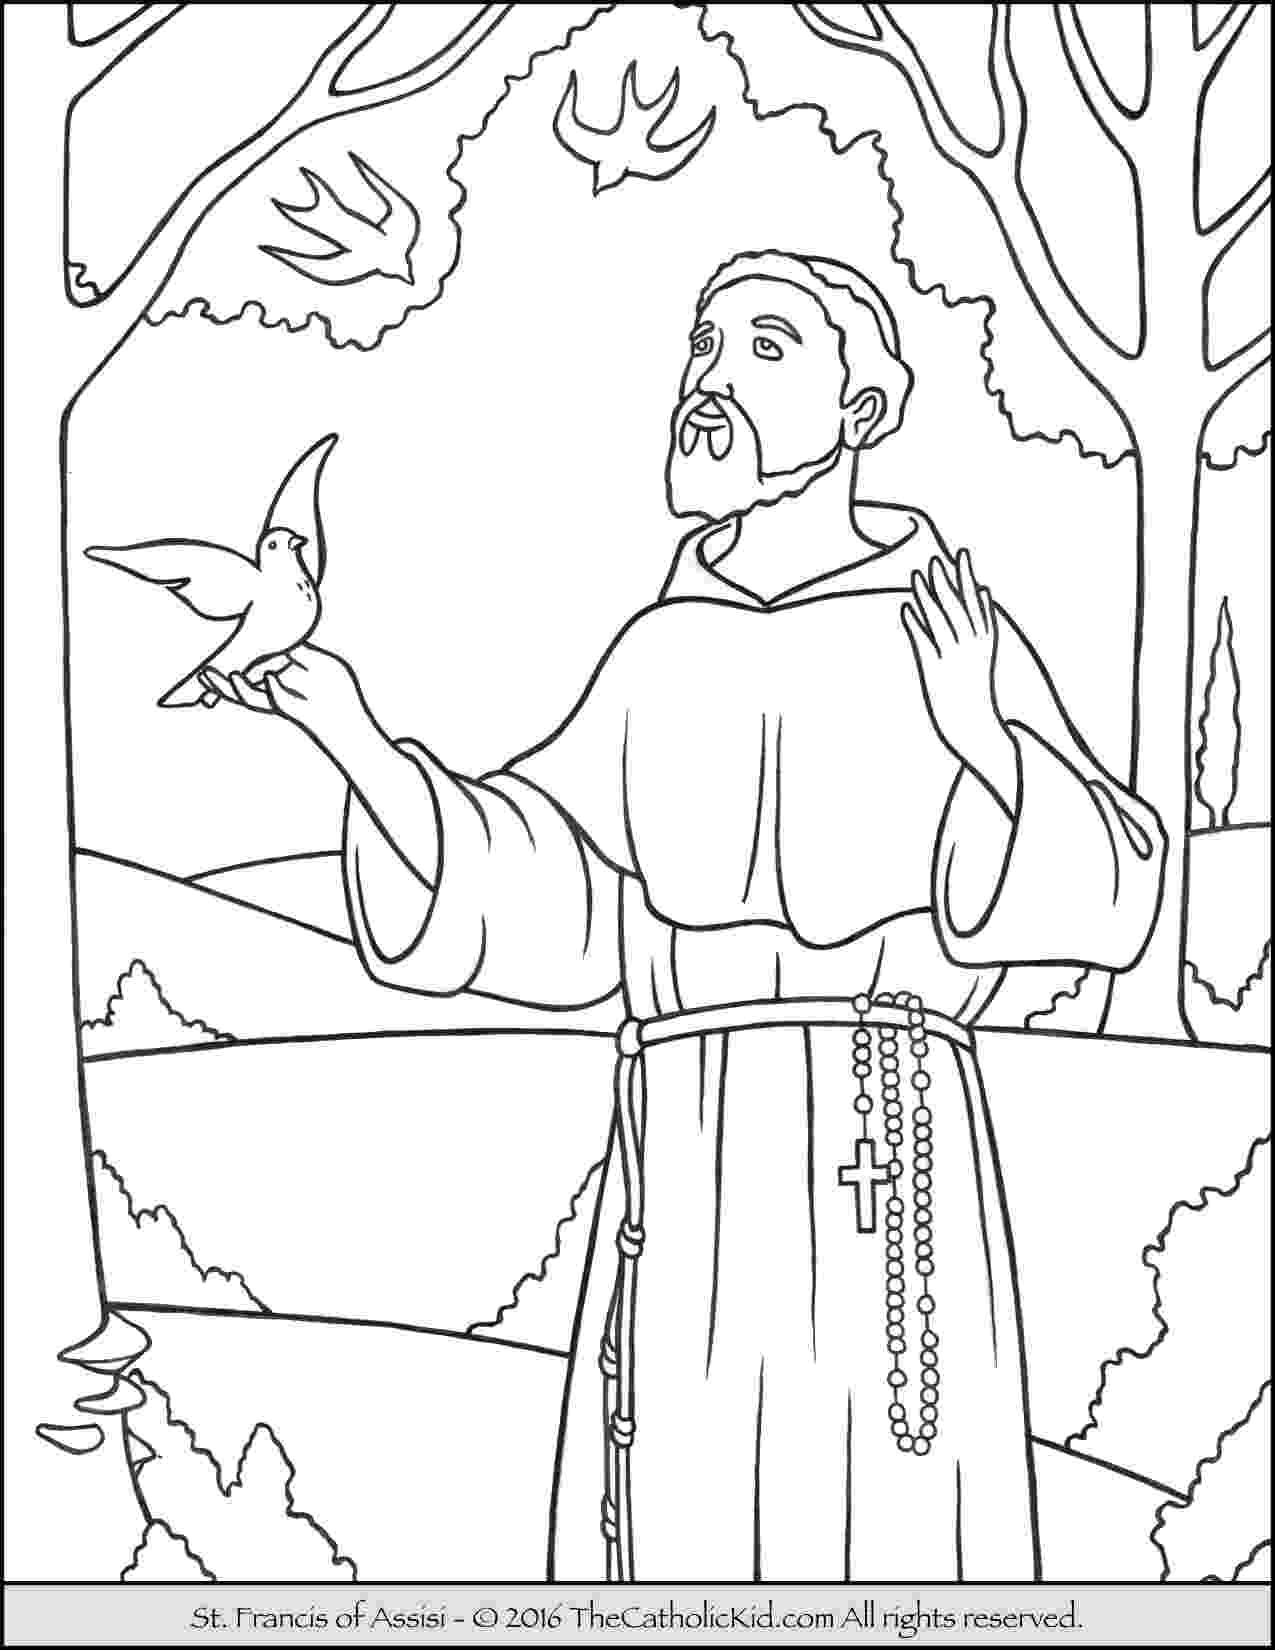 st francis of assisi coloring page saint francis coloring page francis coloring of page assisi st 